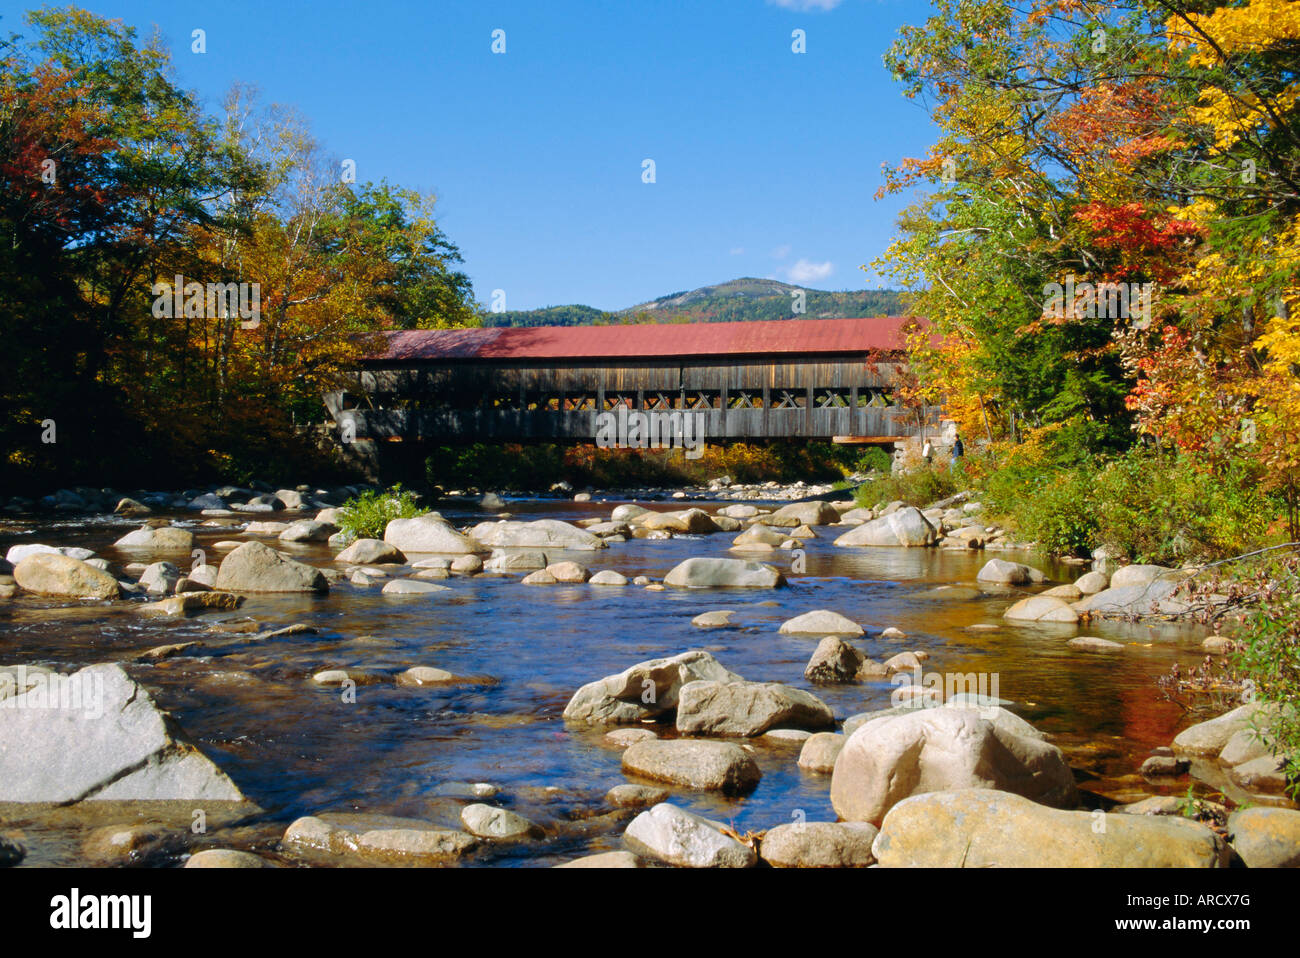 Pont couvert d'Albany, Swift River, Kangamagus Highway, New Hampshire, USA Banque D'Images